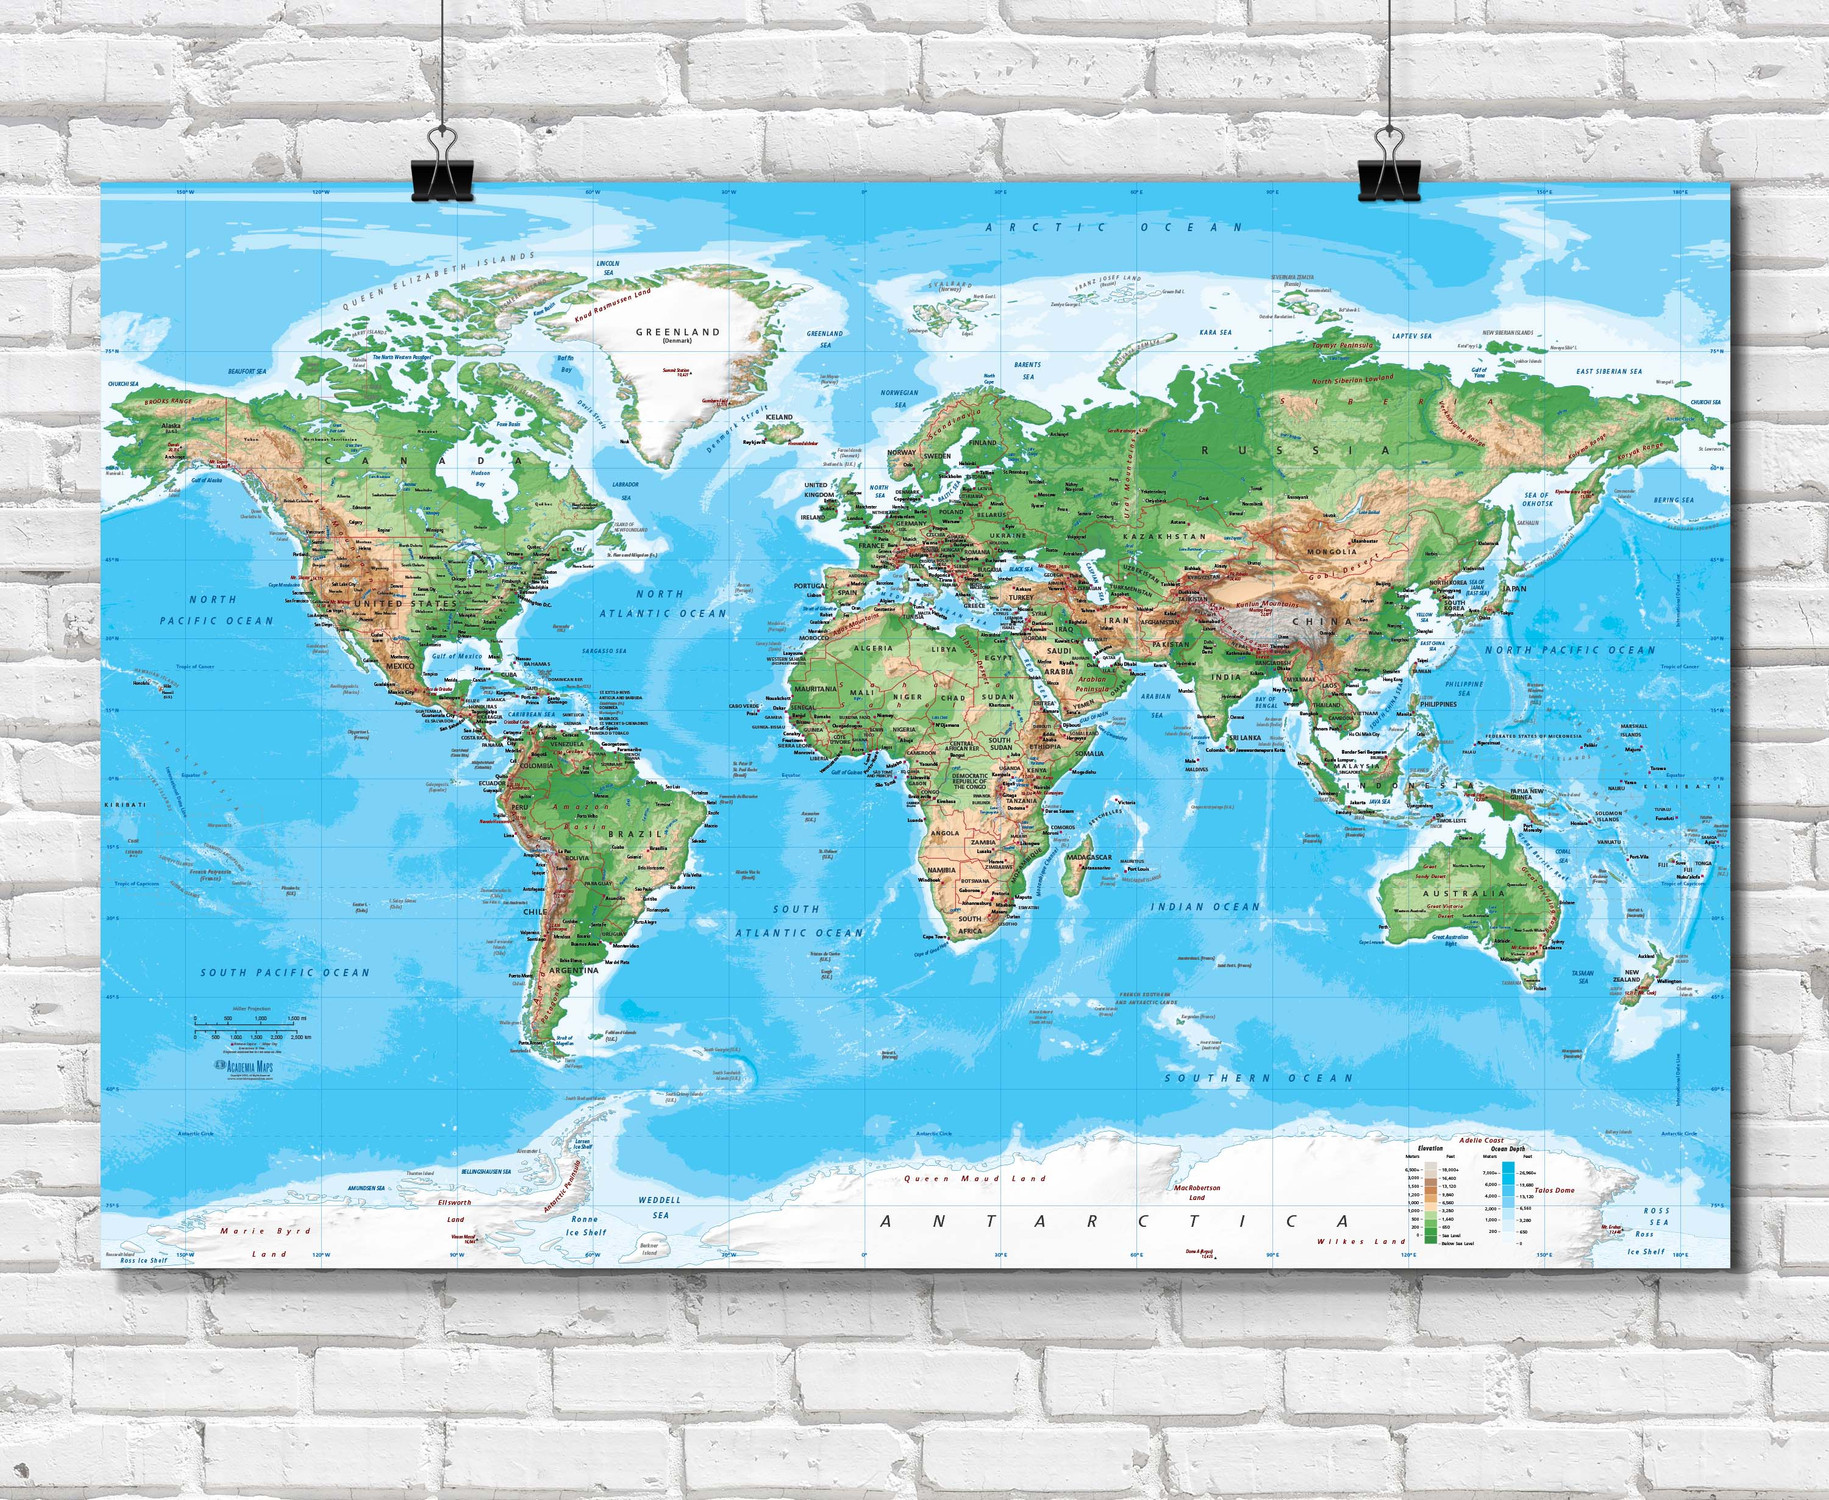 Topographic World Wall Map - Miller Projection, World Maps Online